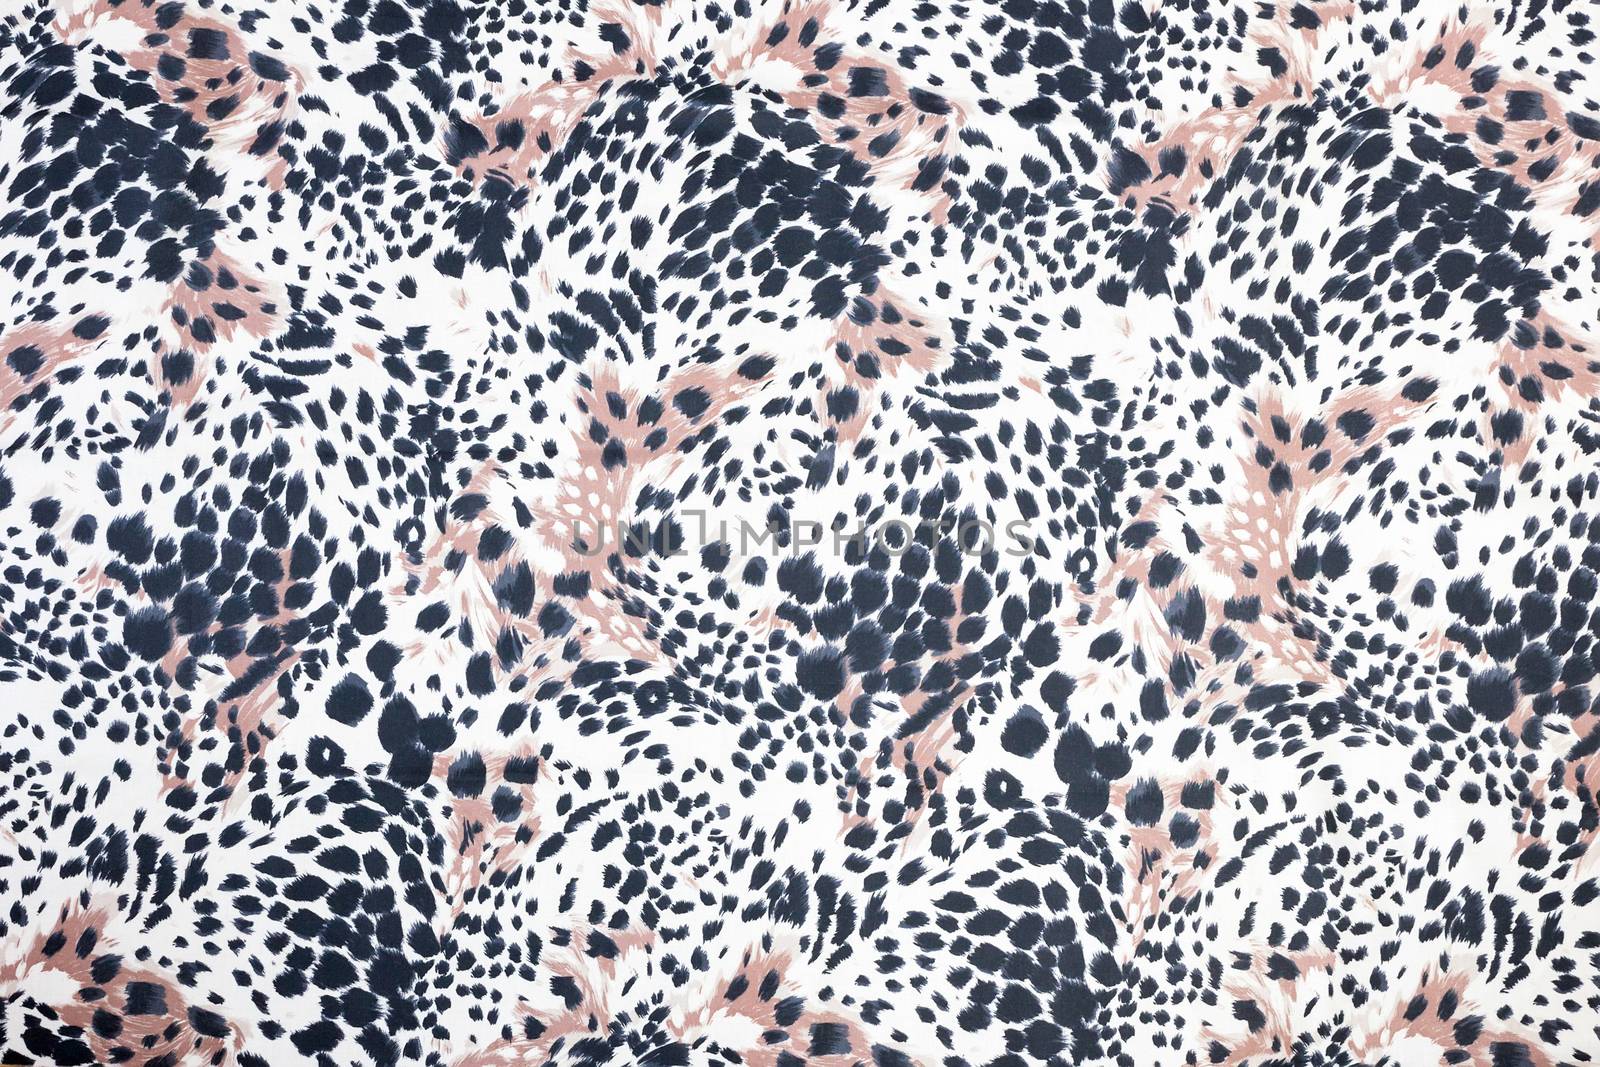 Background of spotted animal fur print by BenSchonewille